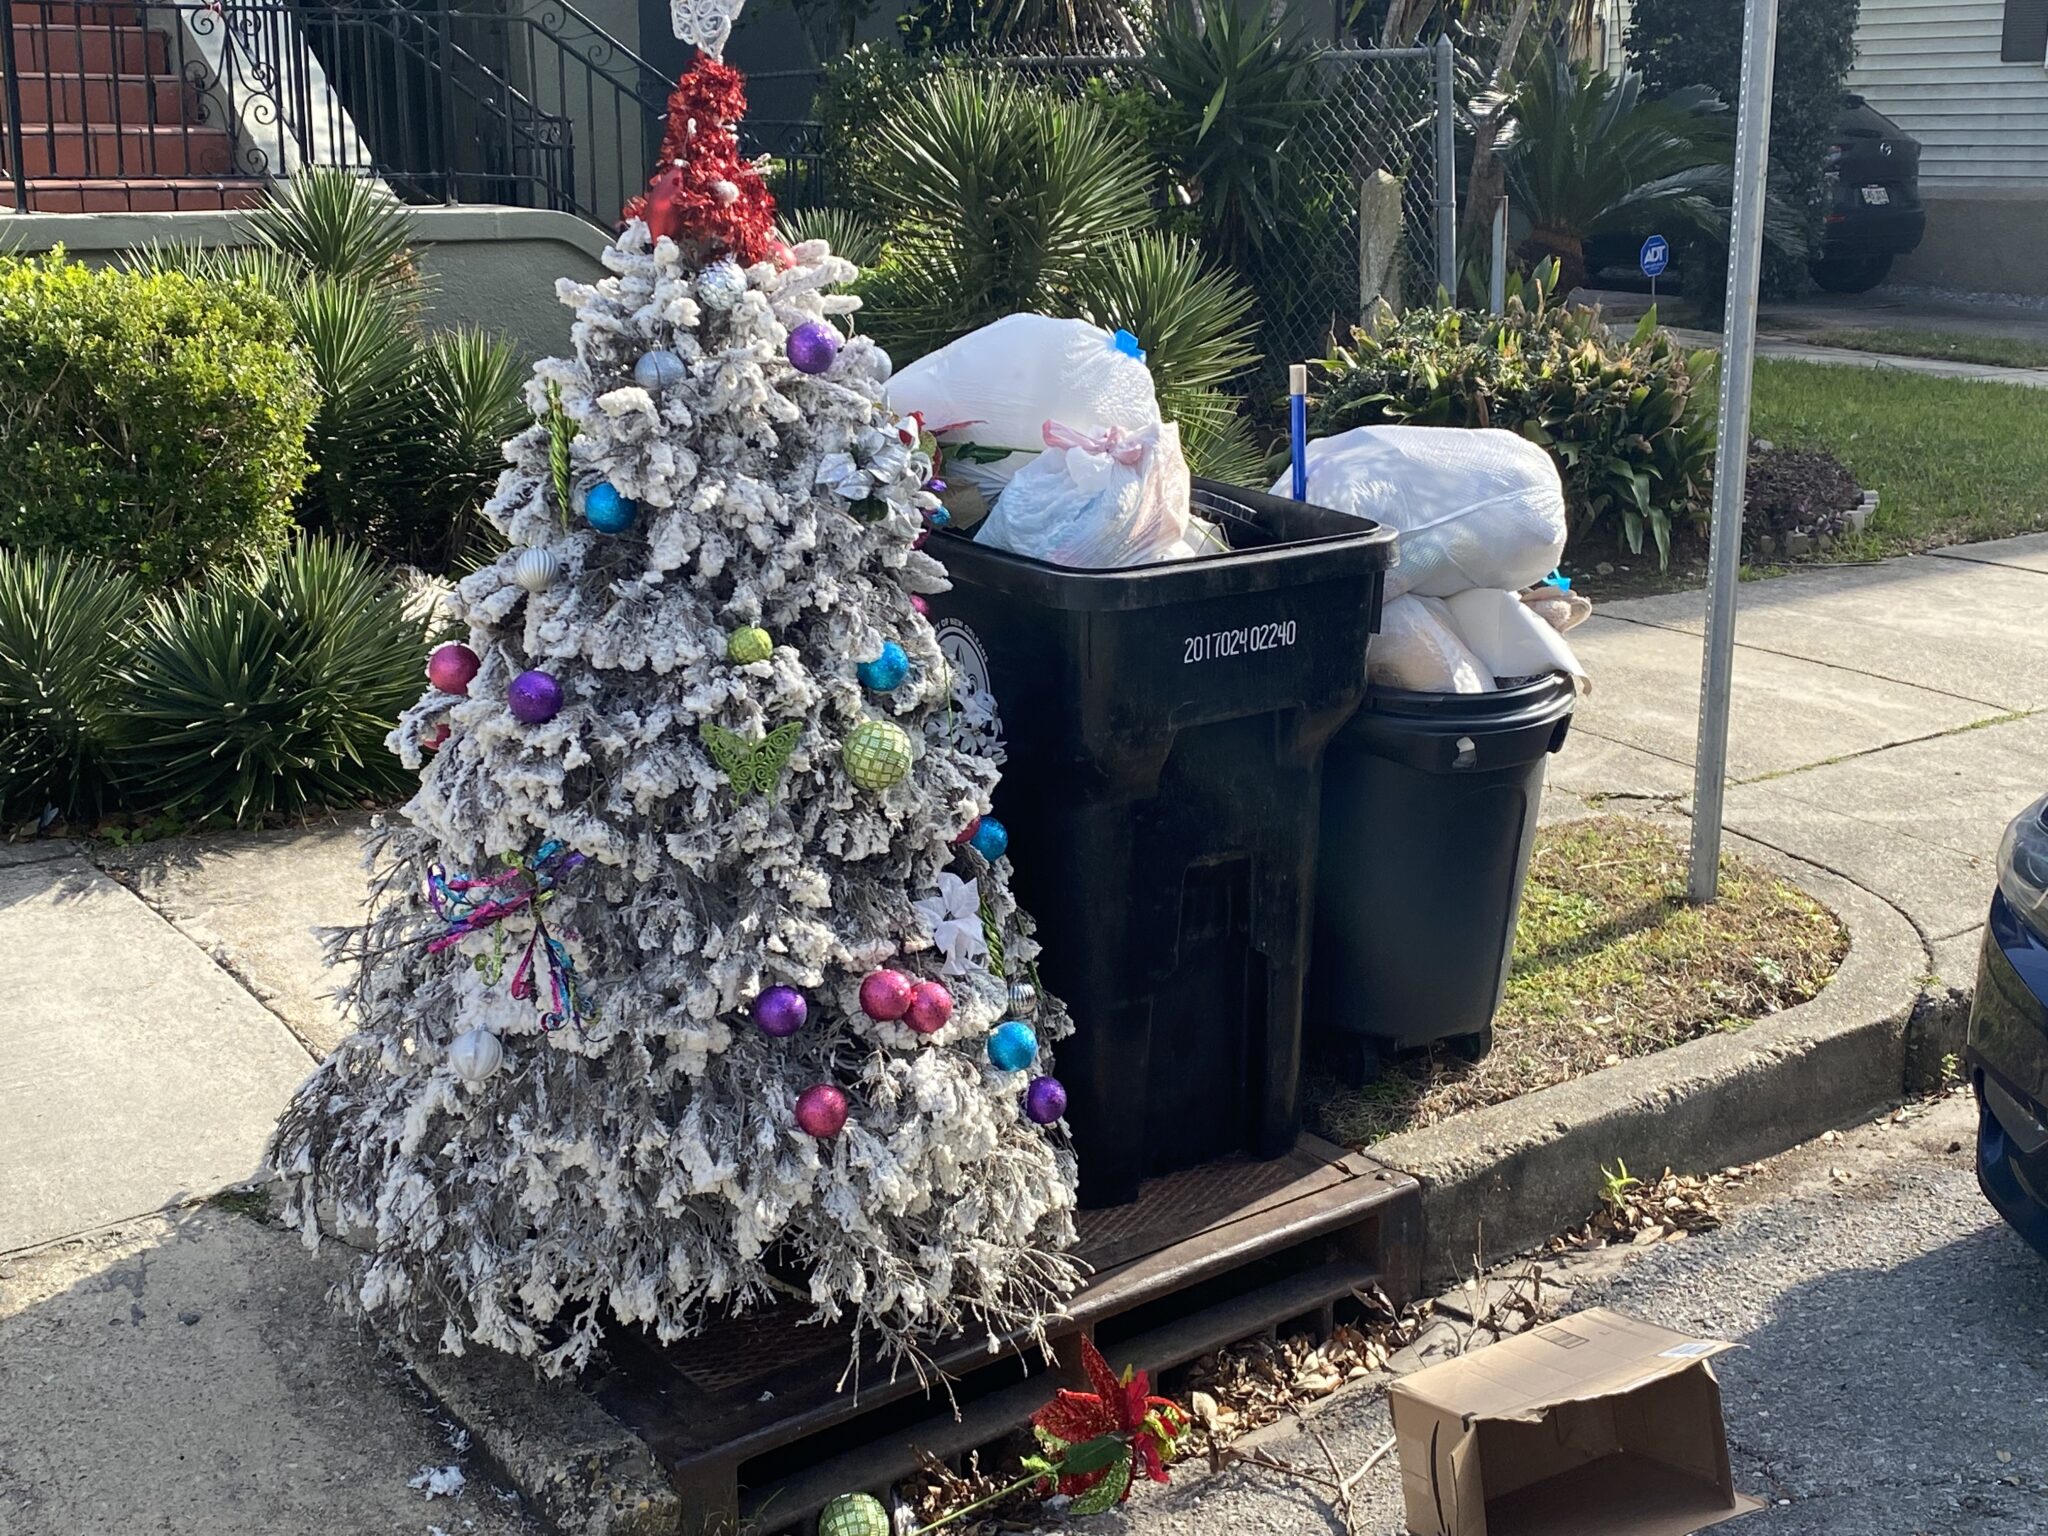 When to put out your holiday trash, recycling and Christmas trees